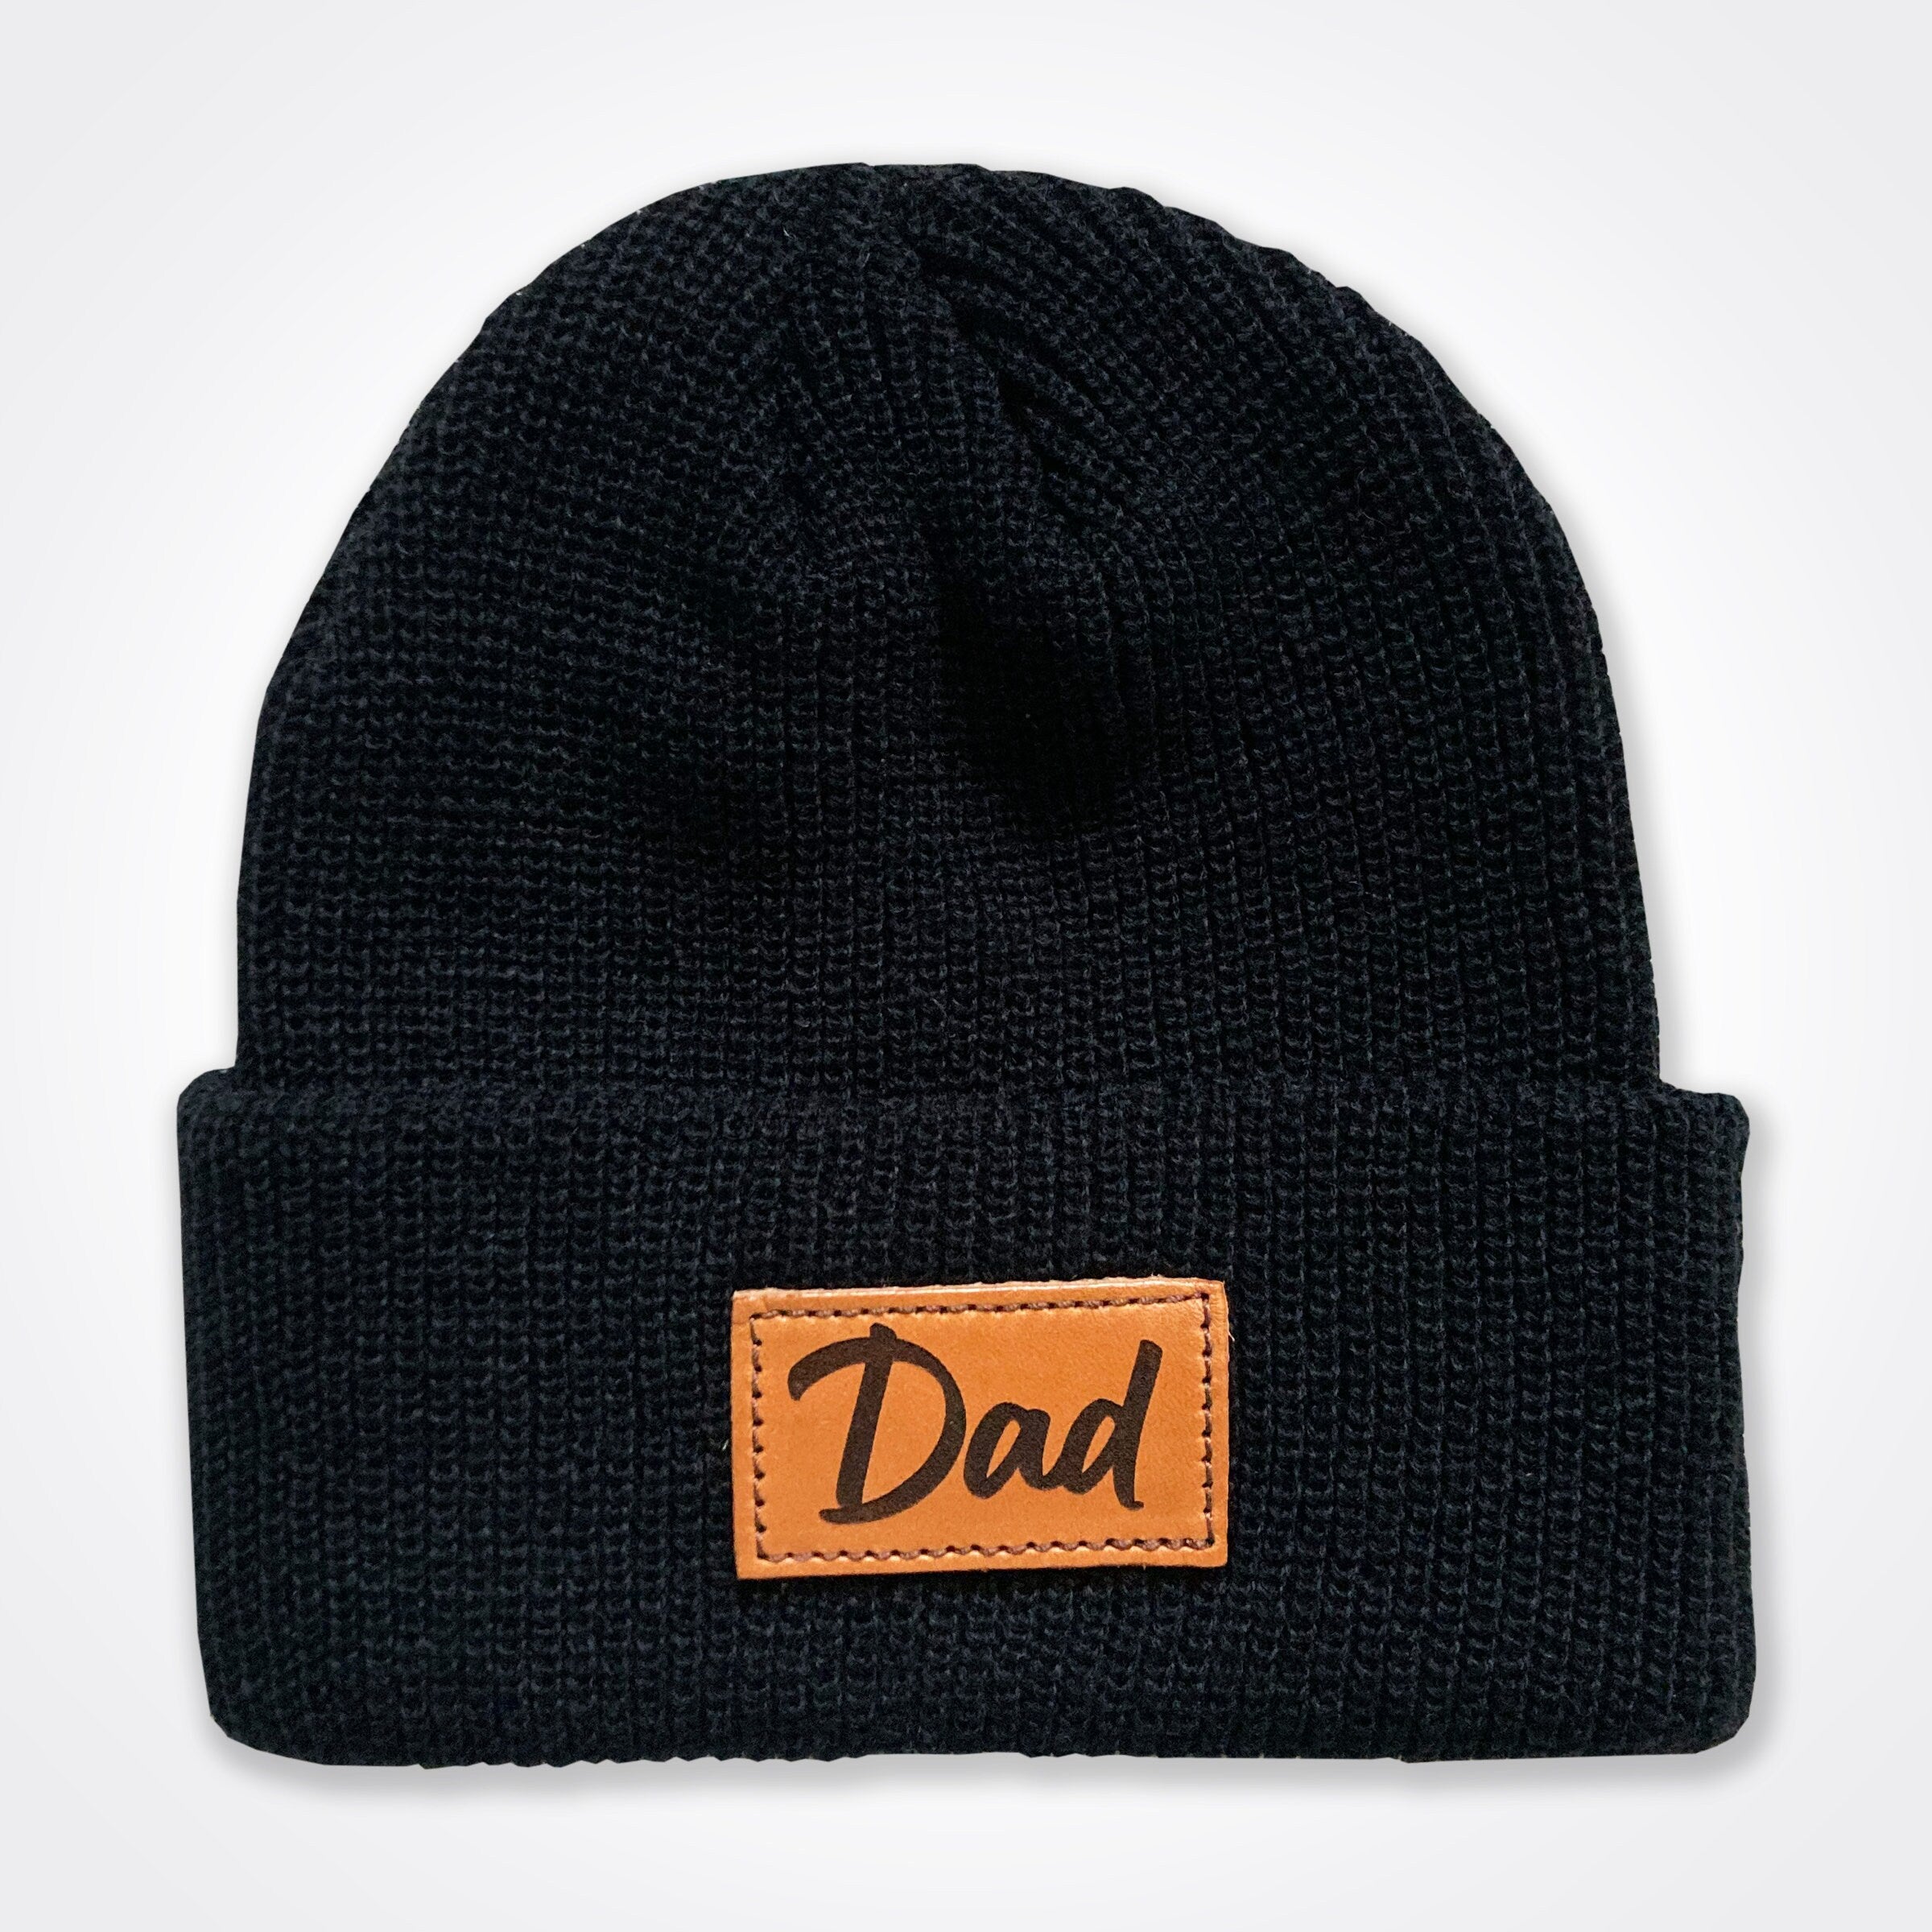 Dad Leather Patch Beanie In Black, Grey & Light Grey, Classic Winter Hat, Dad hat, Dad Gift, Dad of both